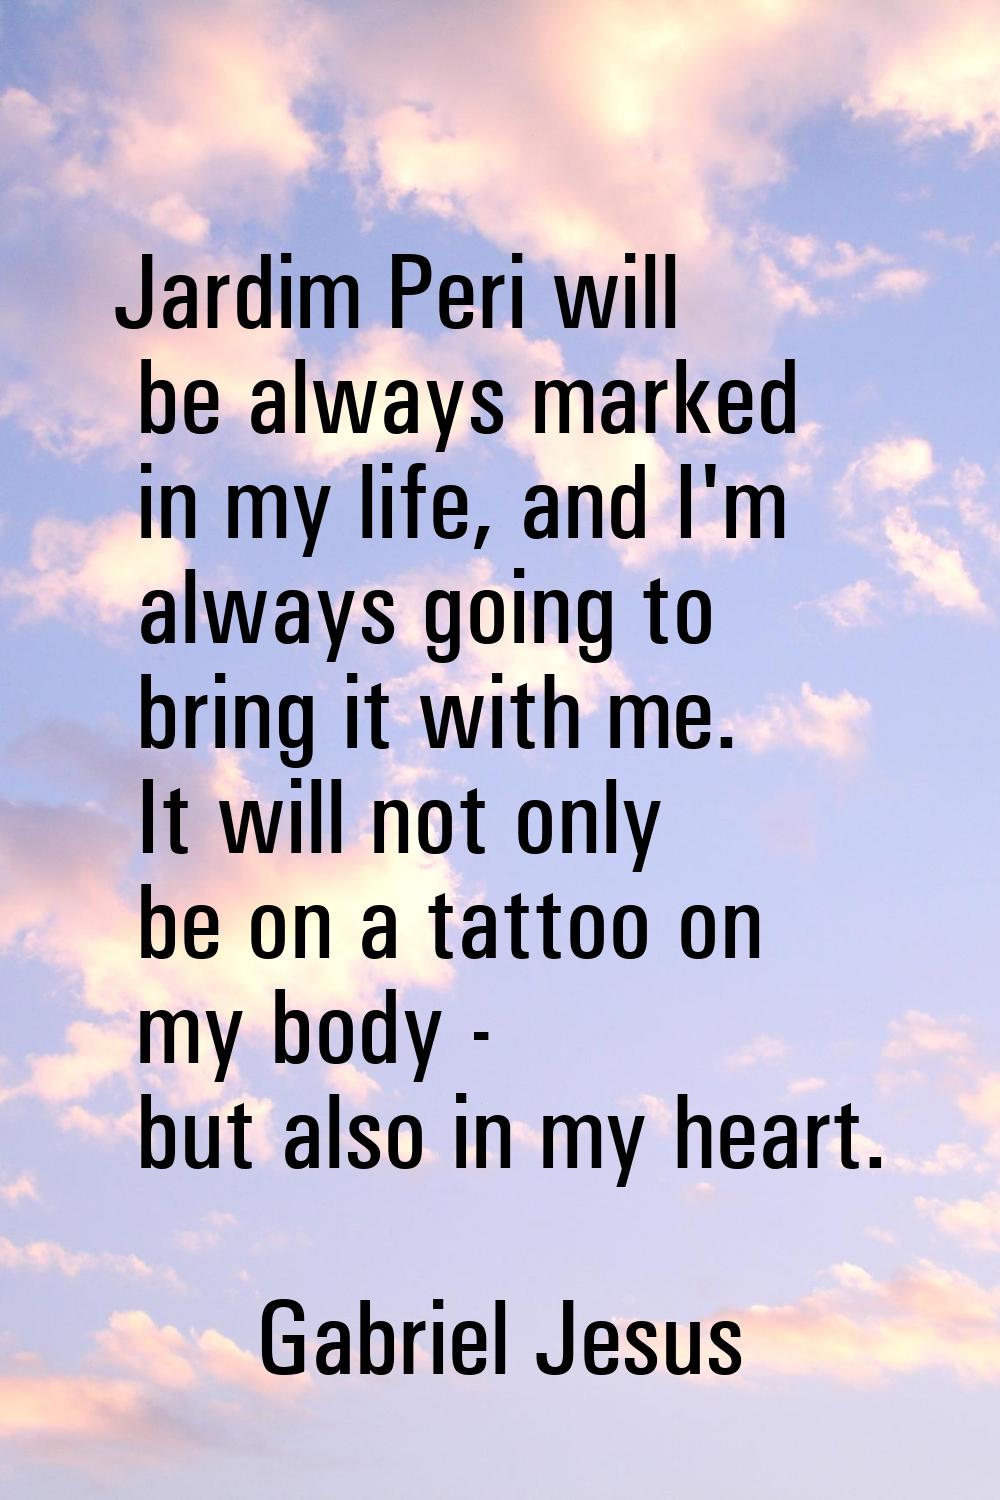 Jardim Peri will be always marked in my life, and I'm always going to bring it with me. It will not